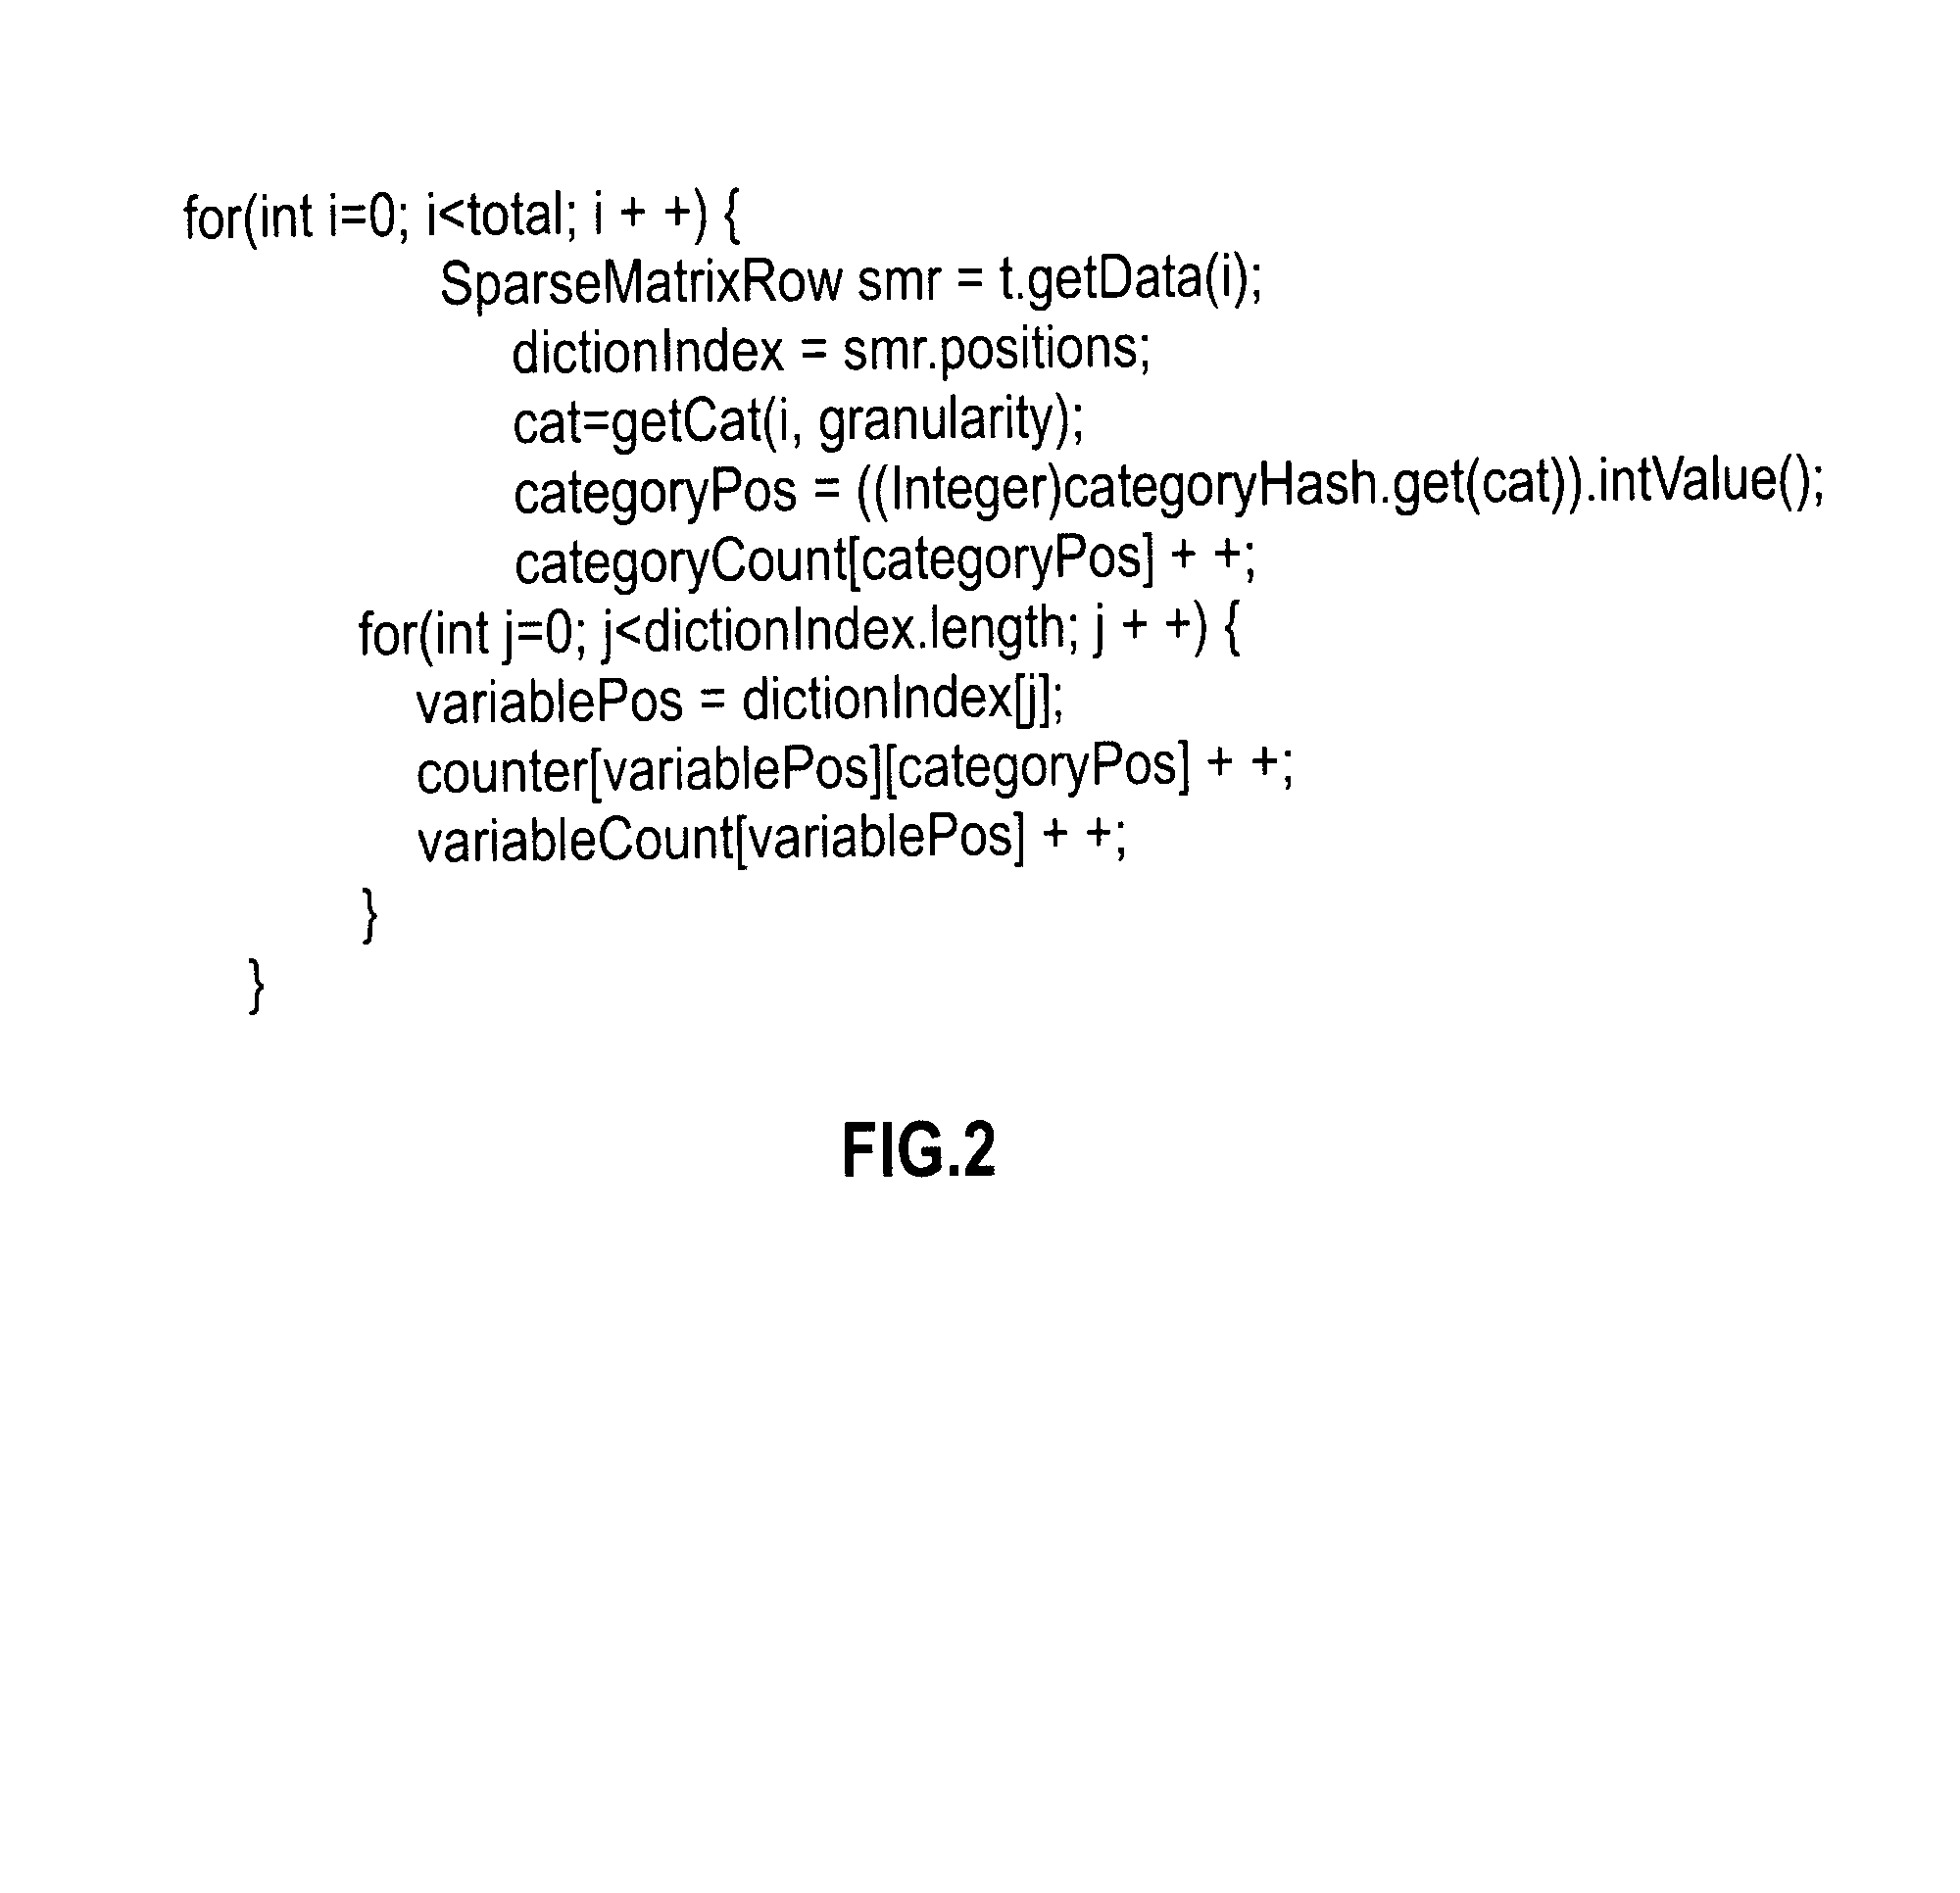 Method and system for identifying relationships between text documents and structured variables pertaining to the text documents